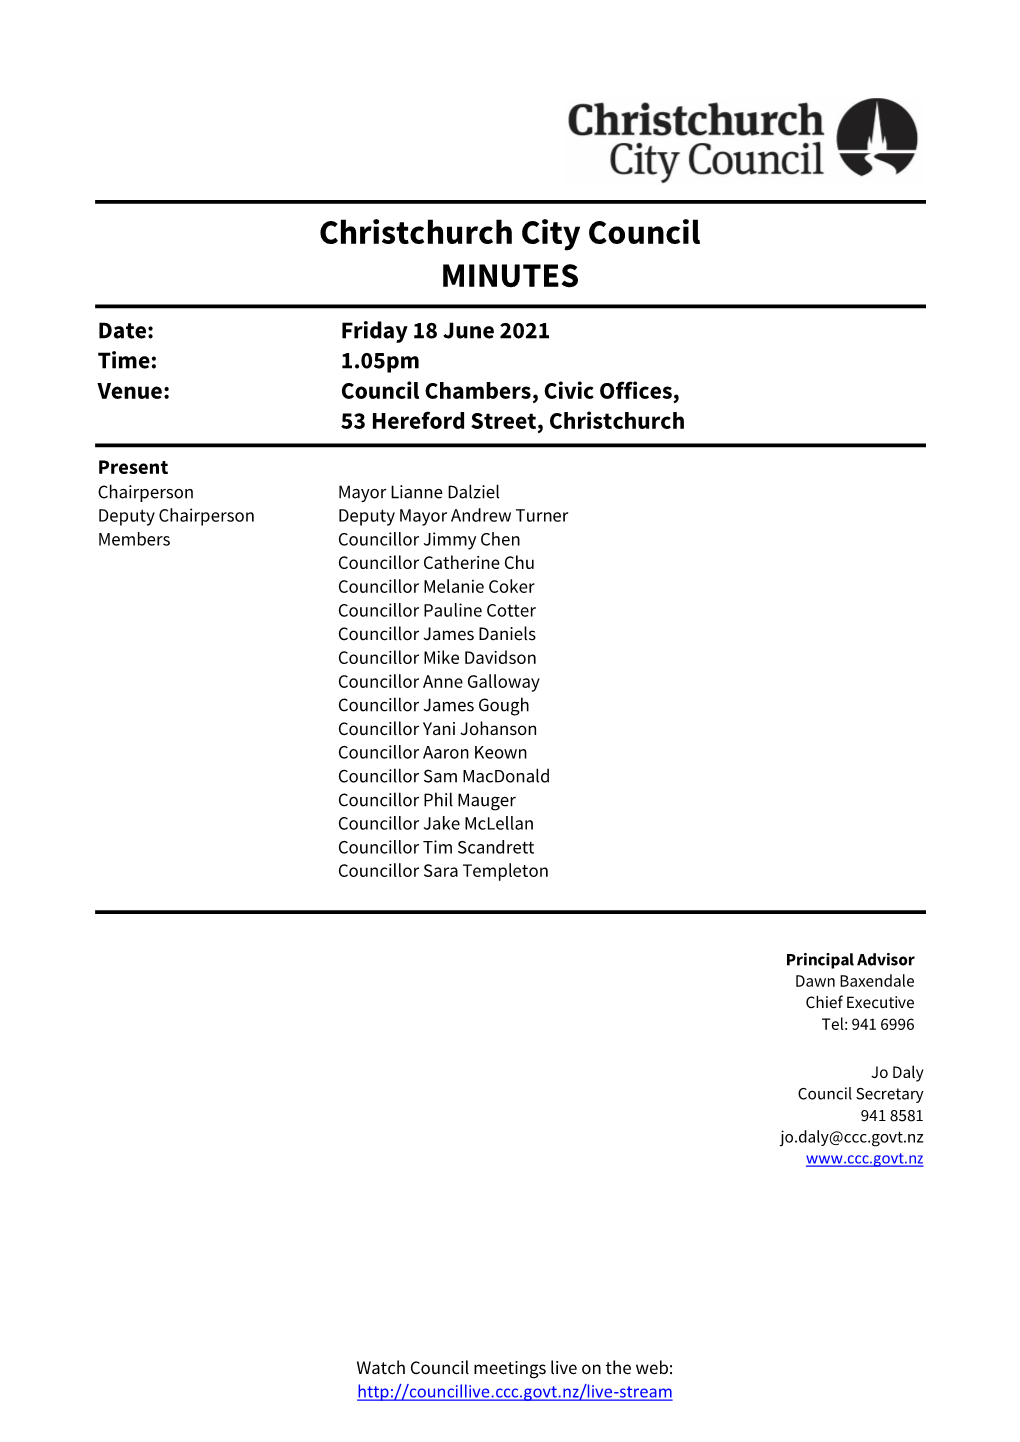 Minutes of Council